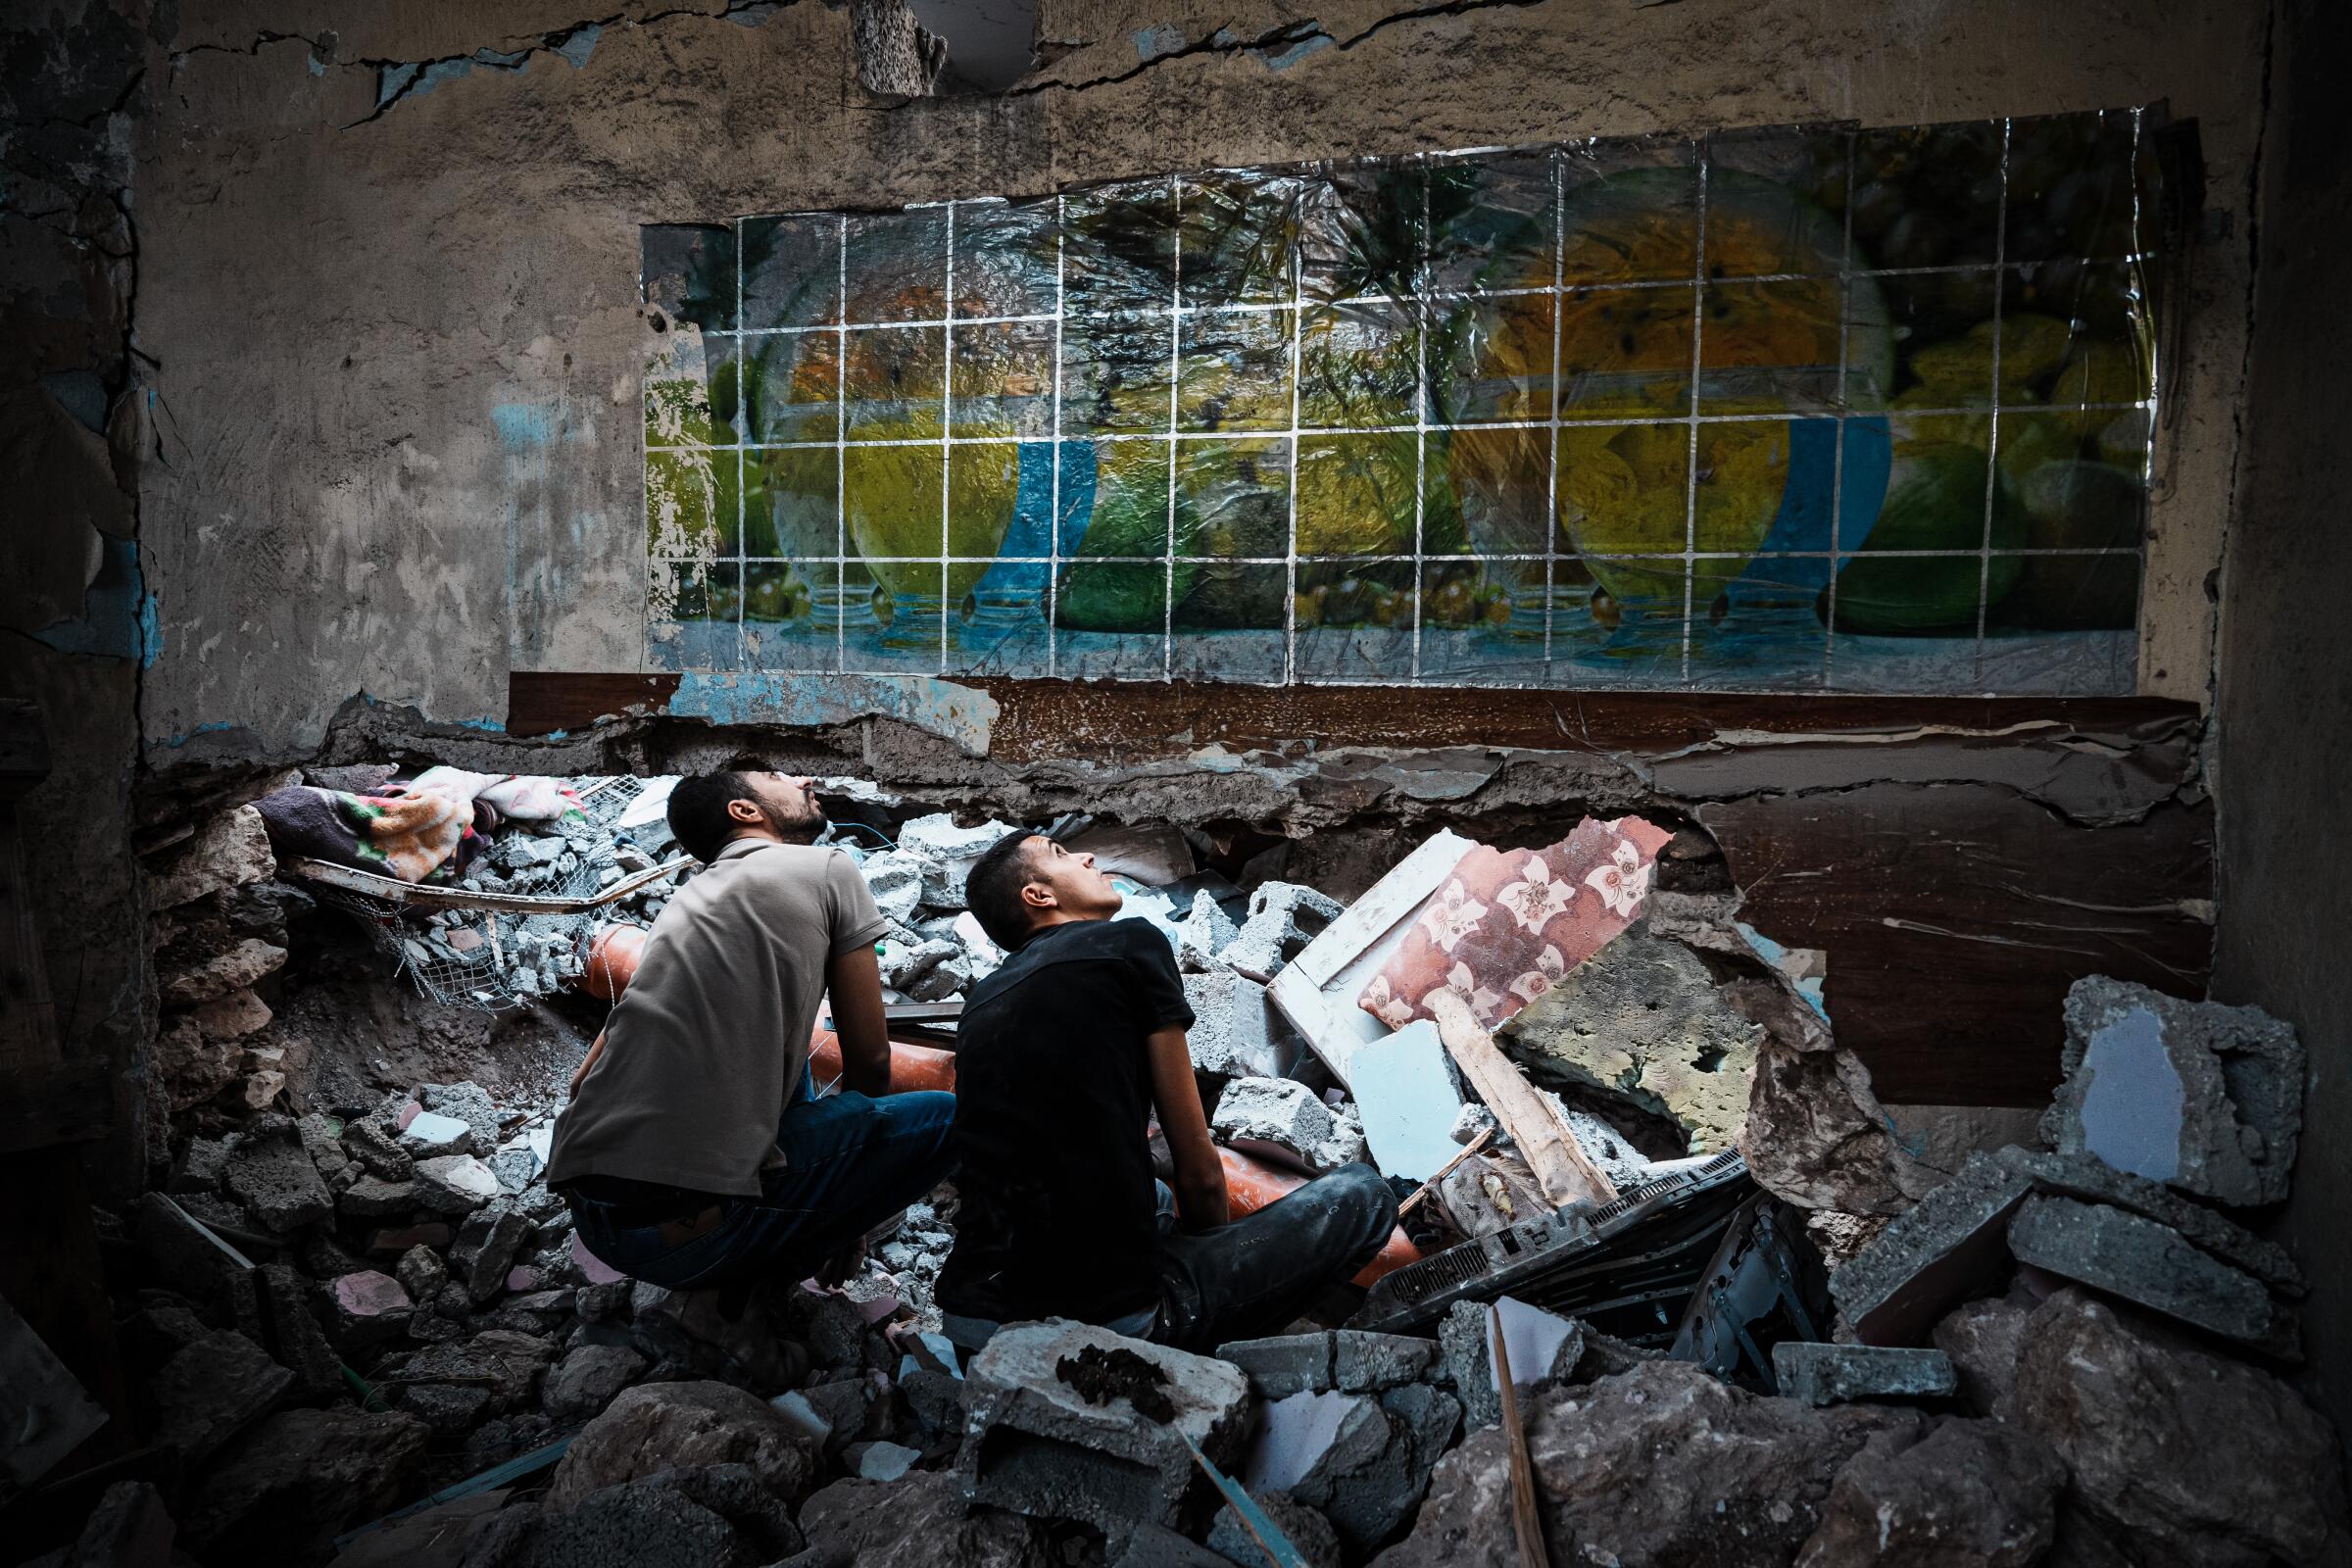 Residents of Jenin, in the West Bank, sifting through rubble in the aftermath of an Israeli airstrike